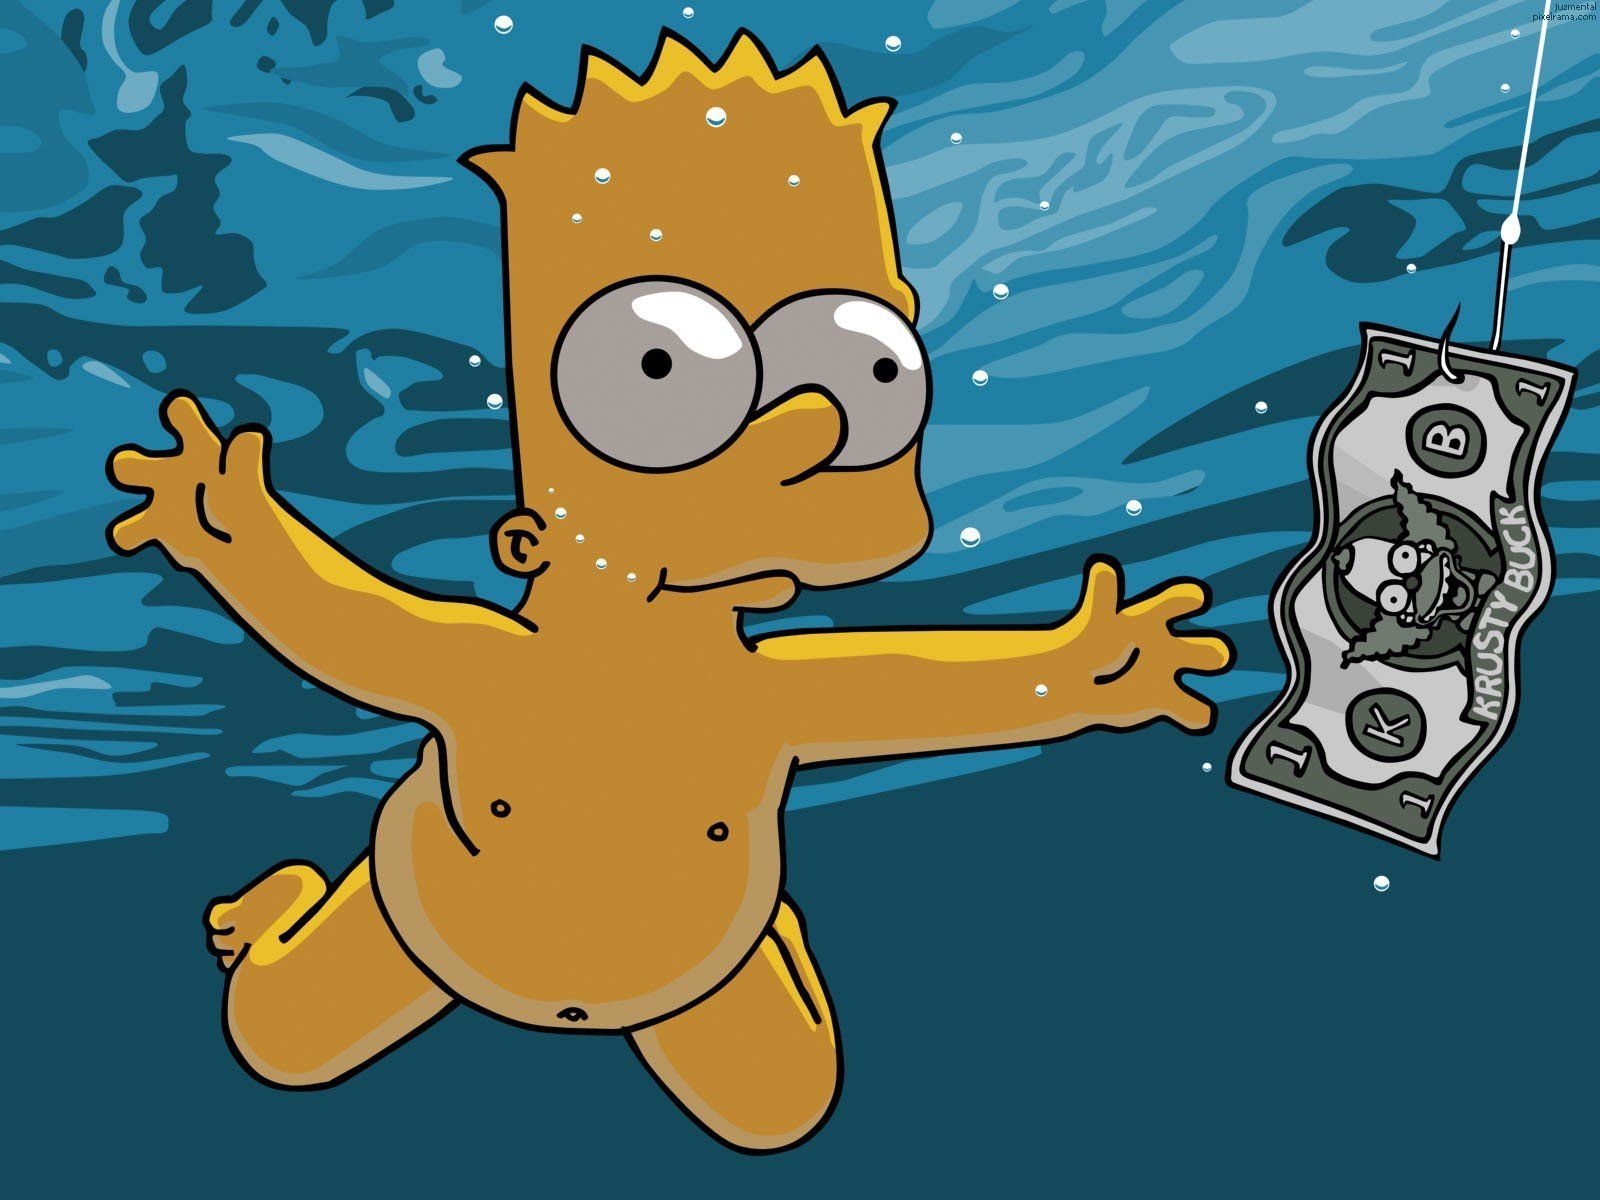 Bart Simpson as a baby, from the Simpsons, in the water with a dollar bill hanging from a hook - The Simpsons, Bart Simpson, Nirvana